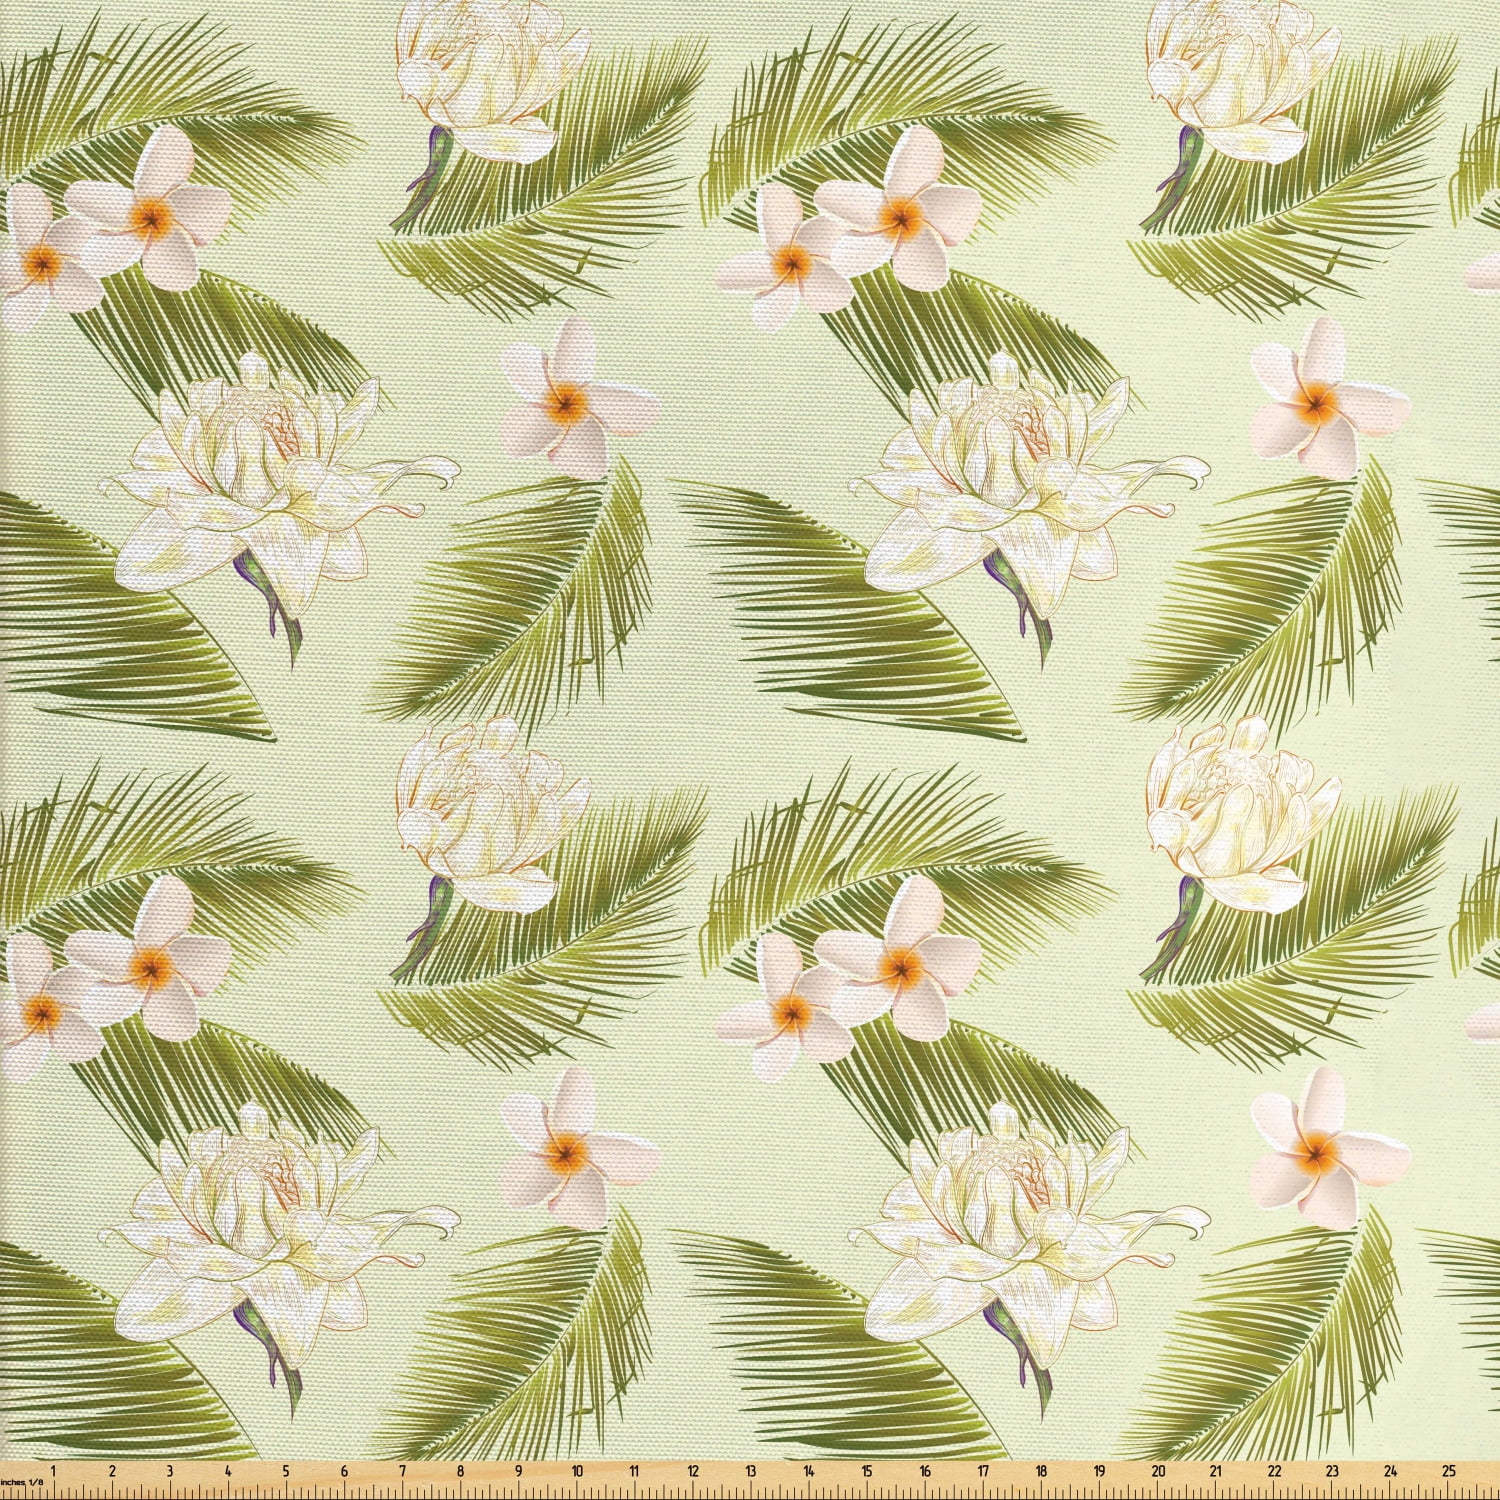 Leaves Fabric by the Yard Upholstery, Repetitive Tropical Blossoms